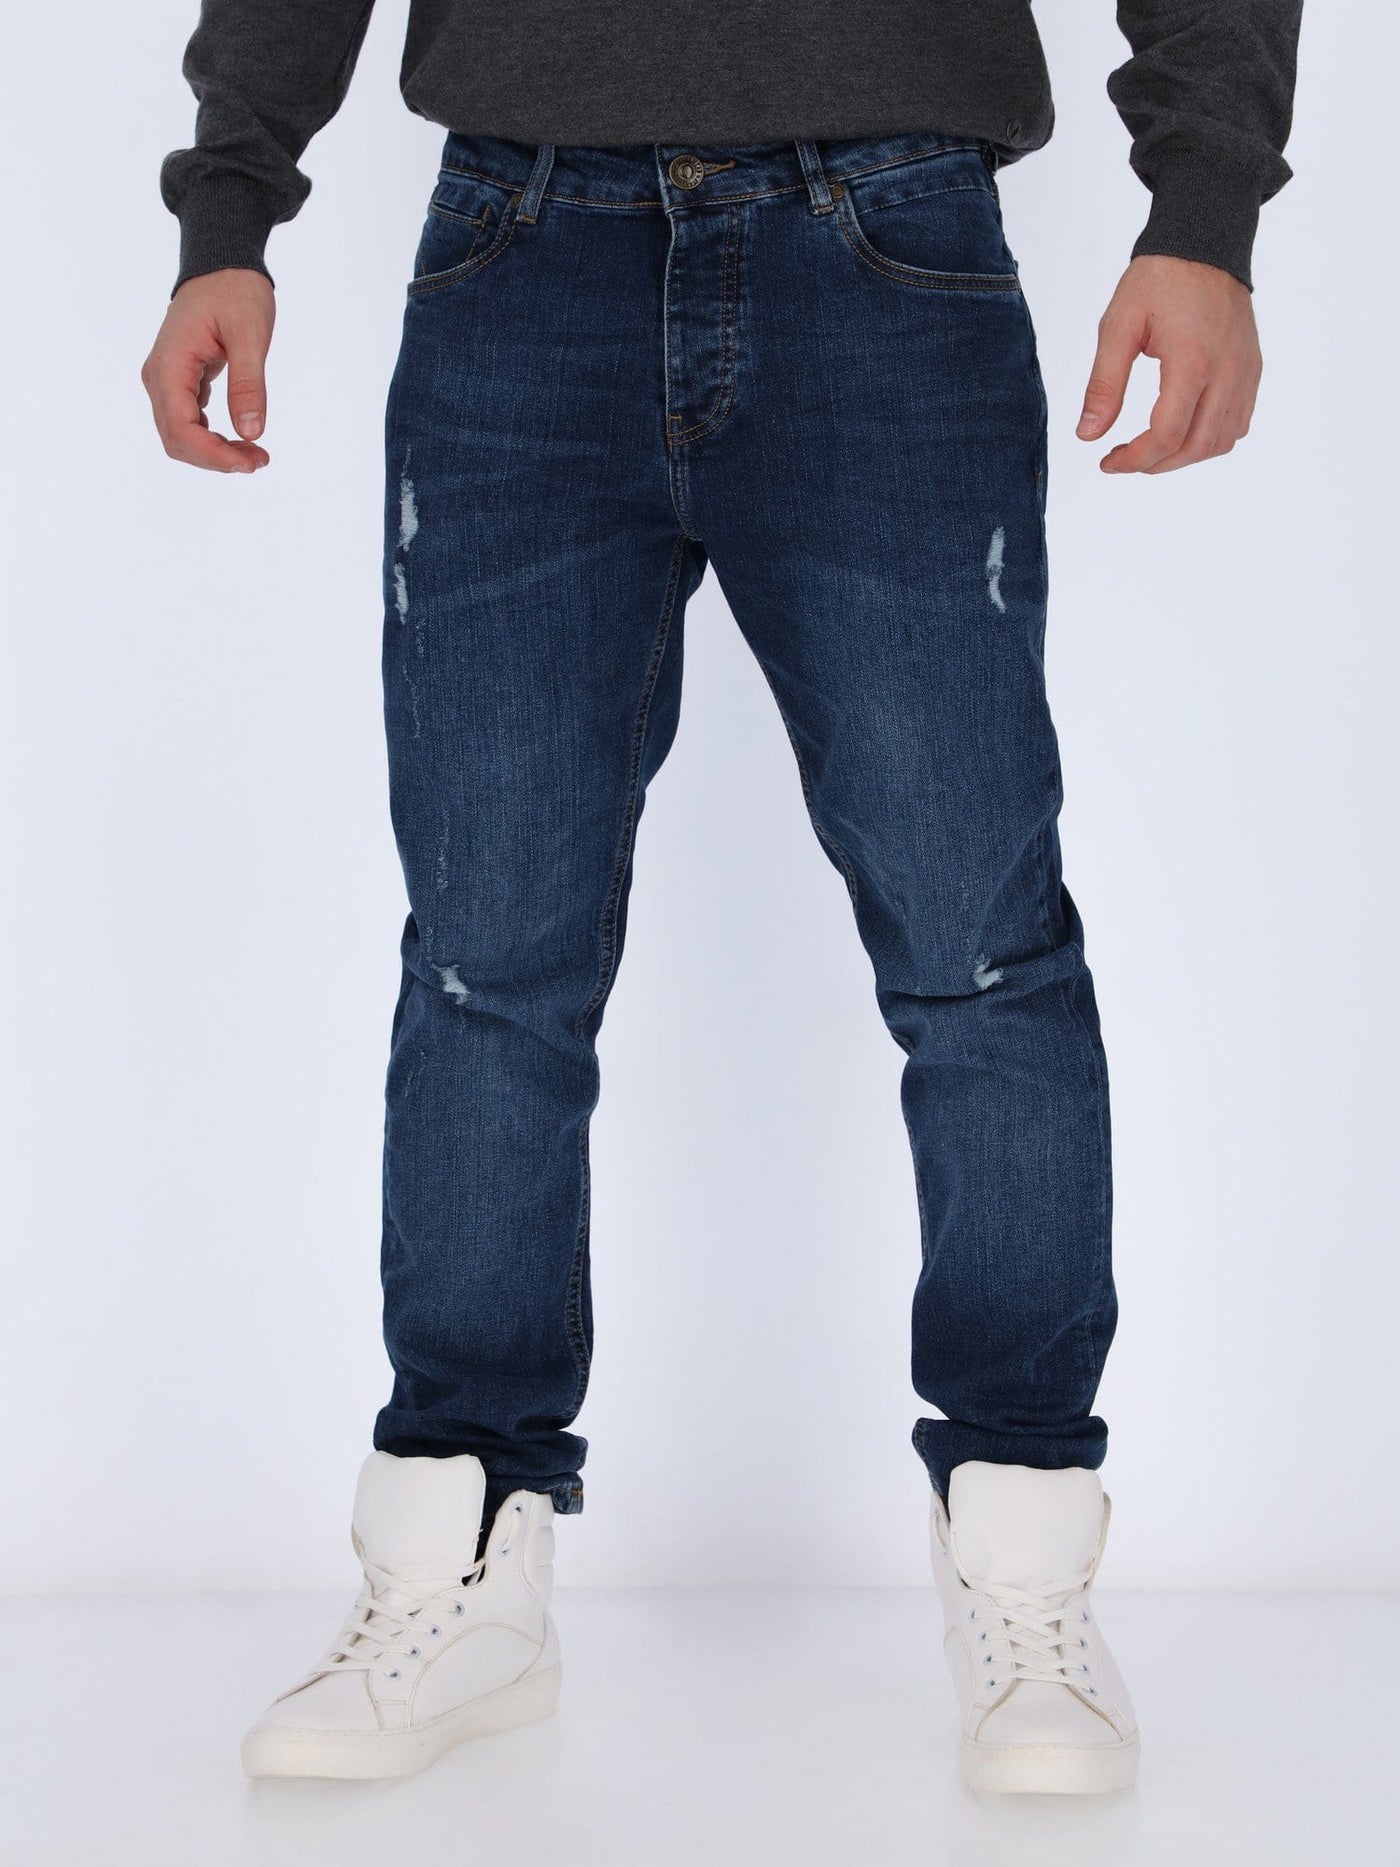 OR Jeans NAVY BLUE / 30 Regular Fit Jeans Pants with Rips